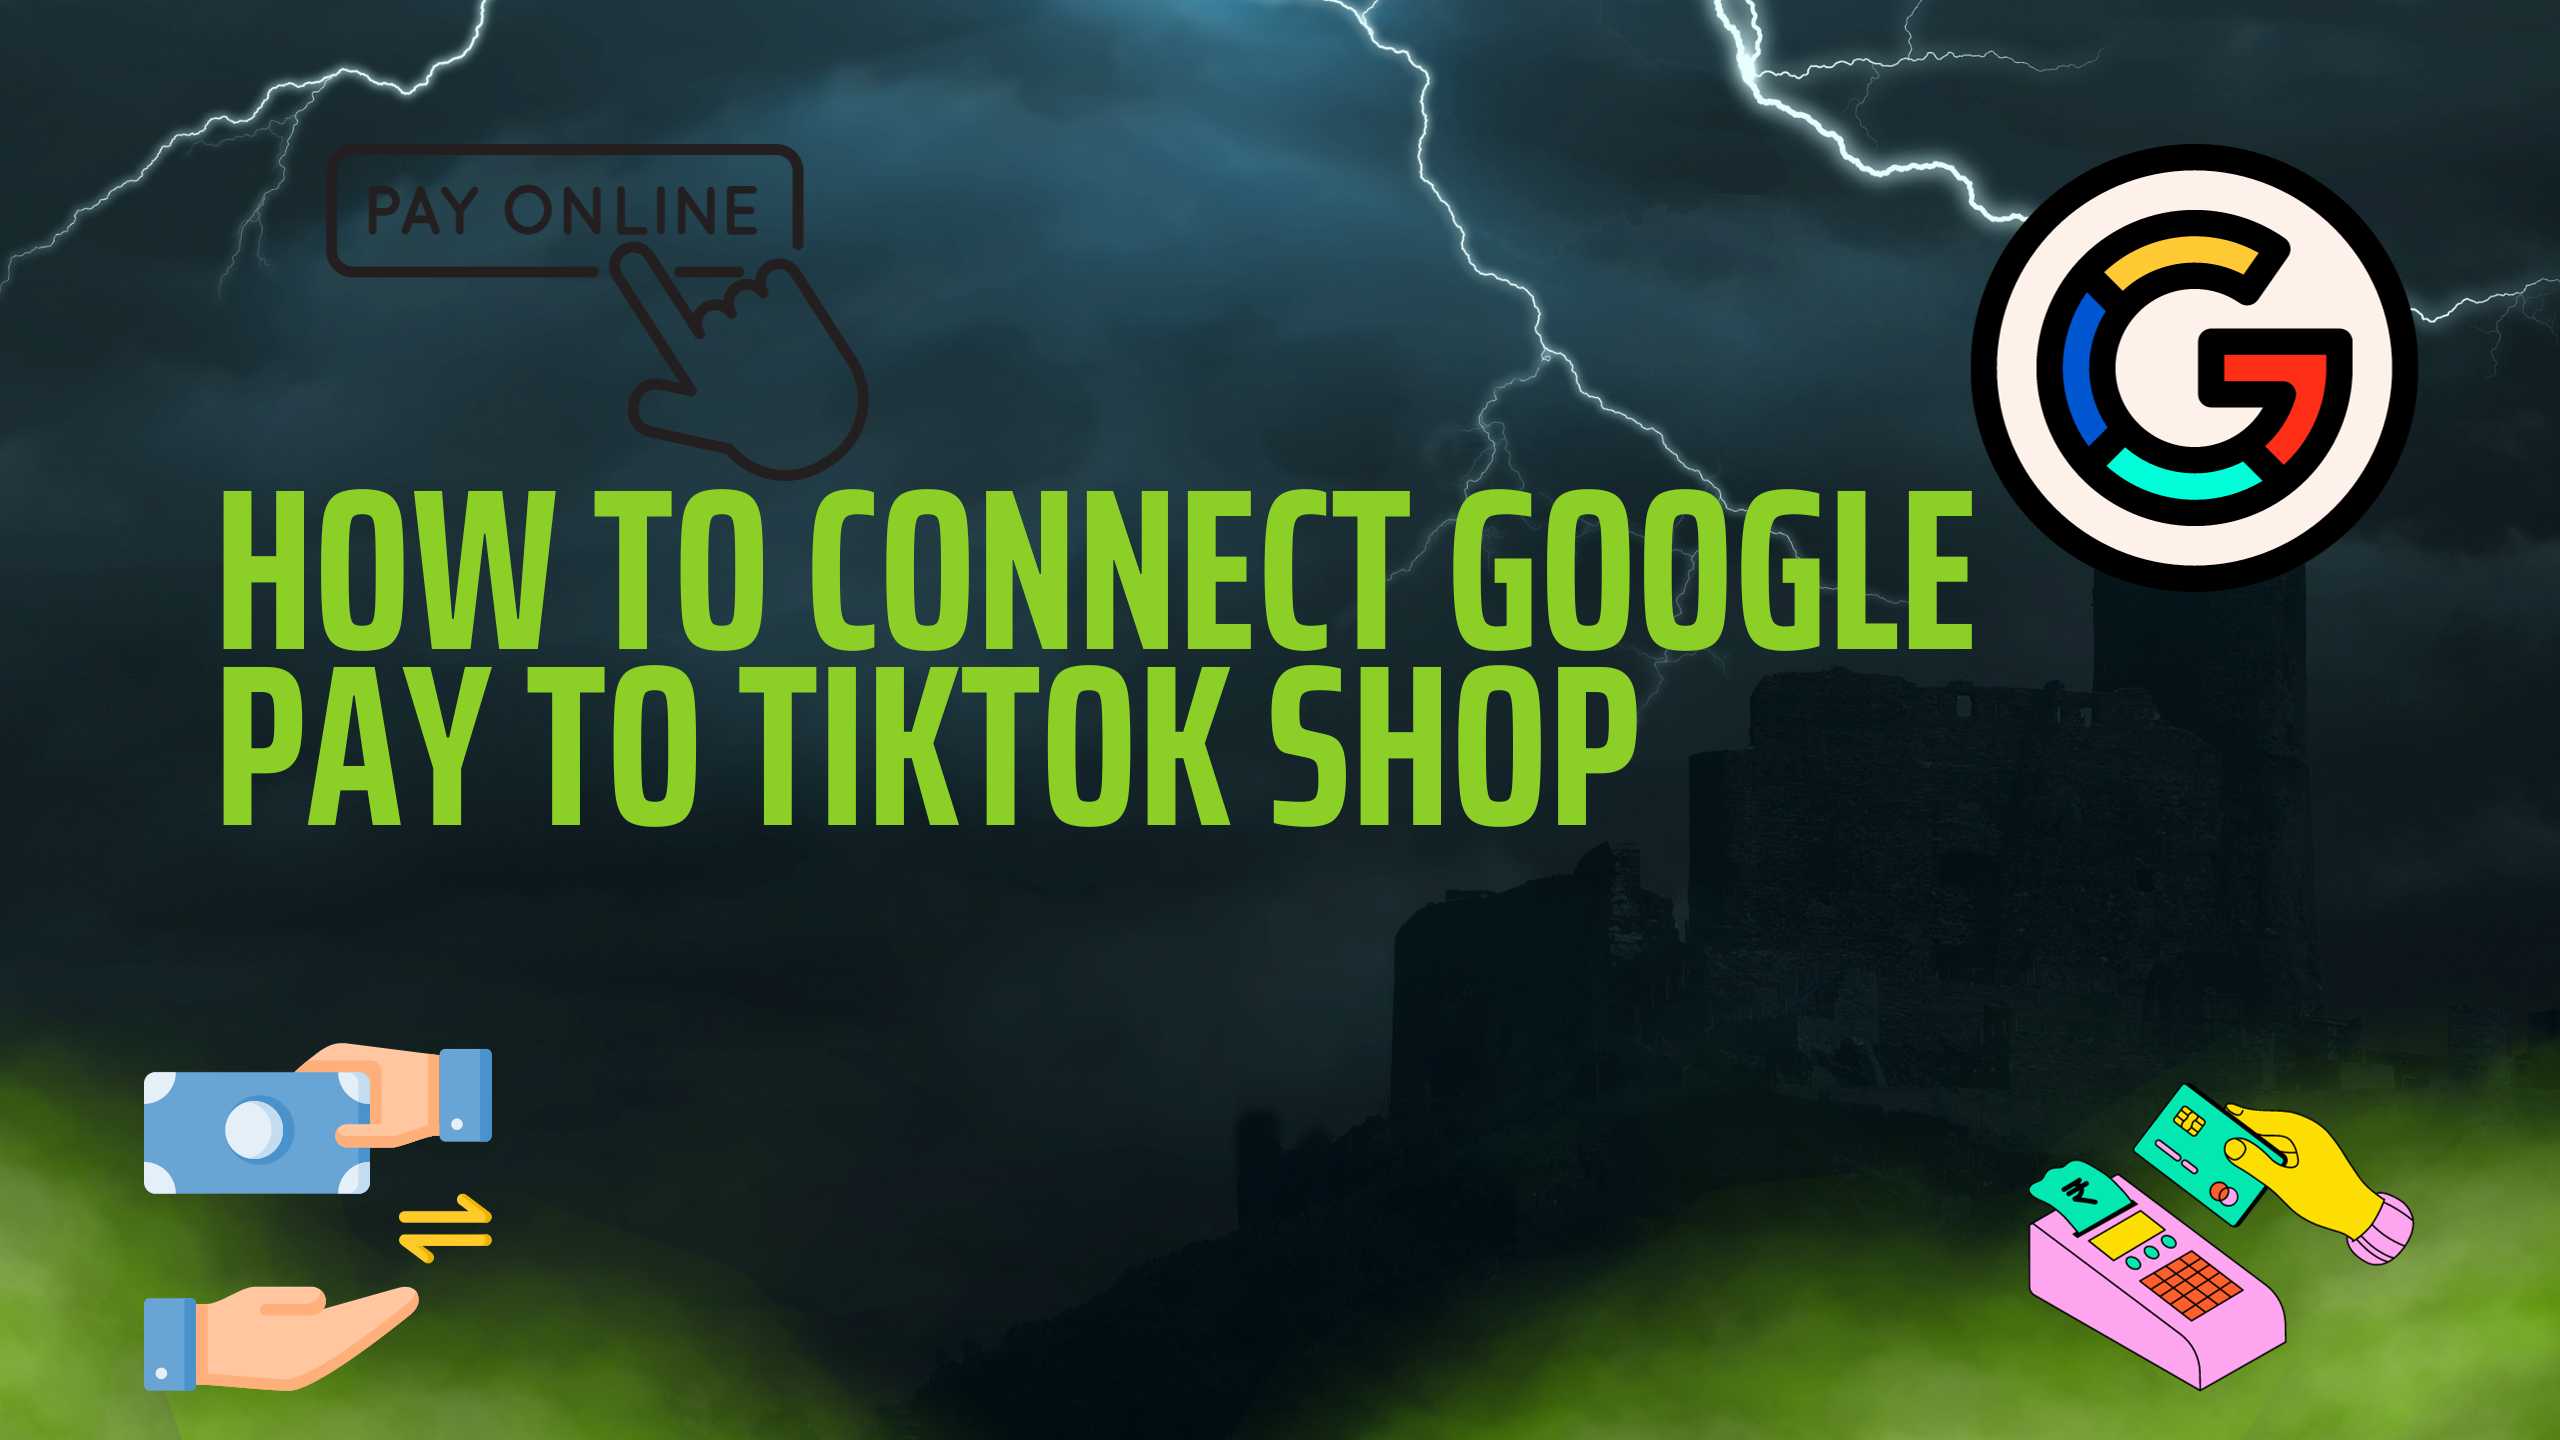 How To Connect Google Pay to TikTok Shop